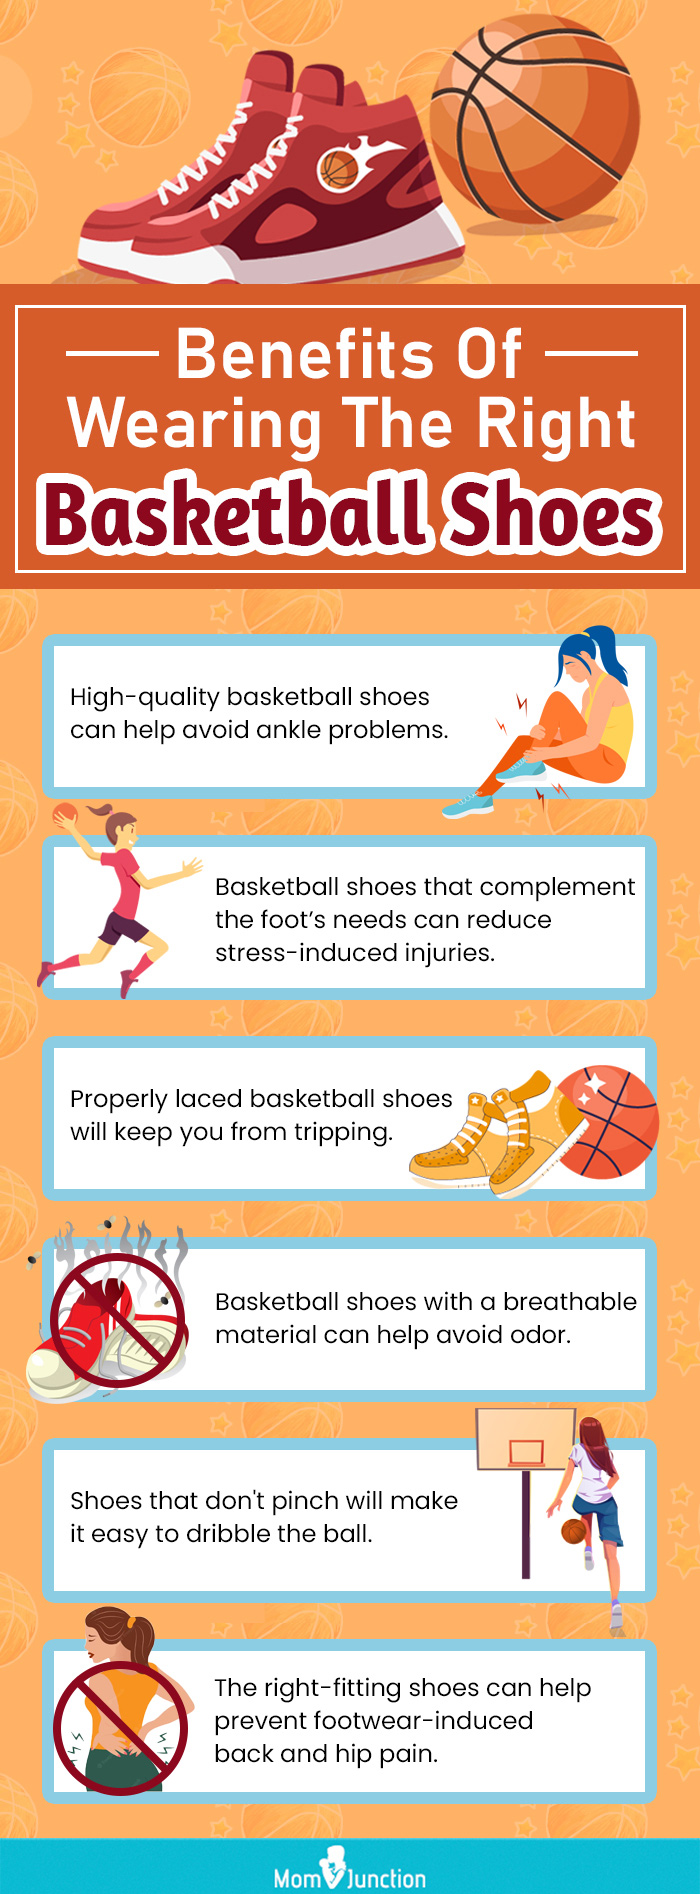 Benefits Of Wearing The Right Basketball Shoes (infographic)